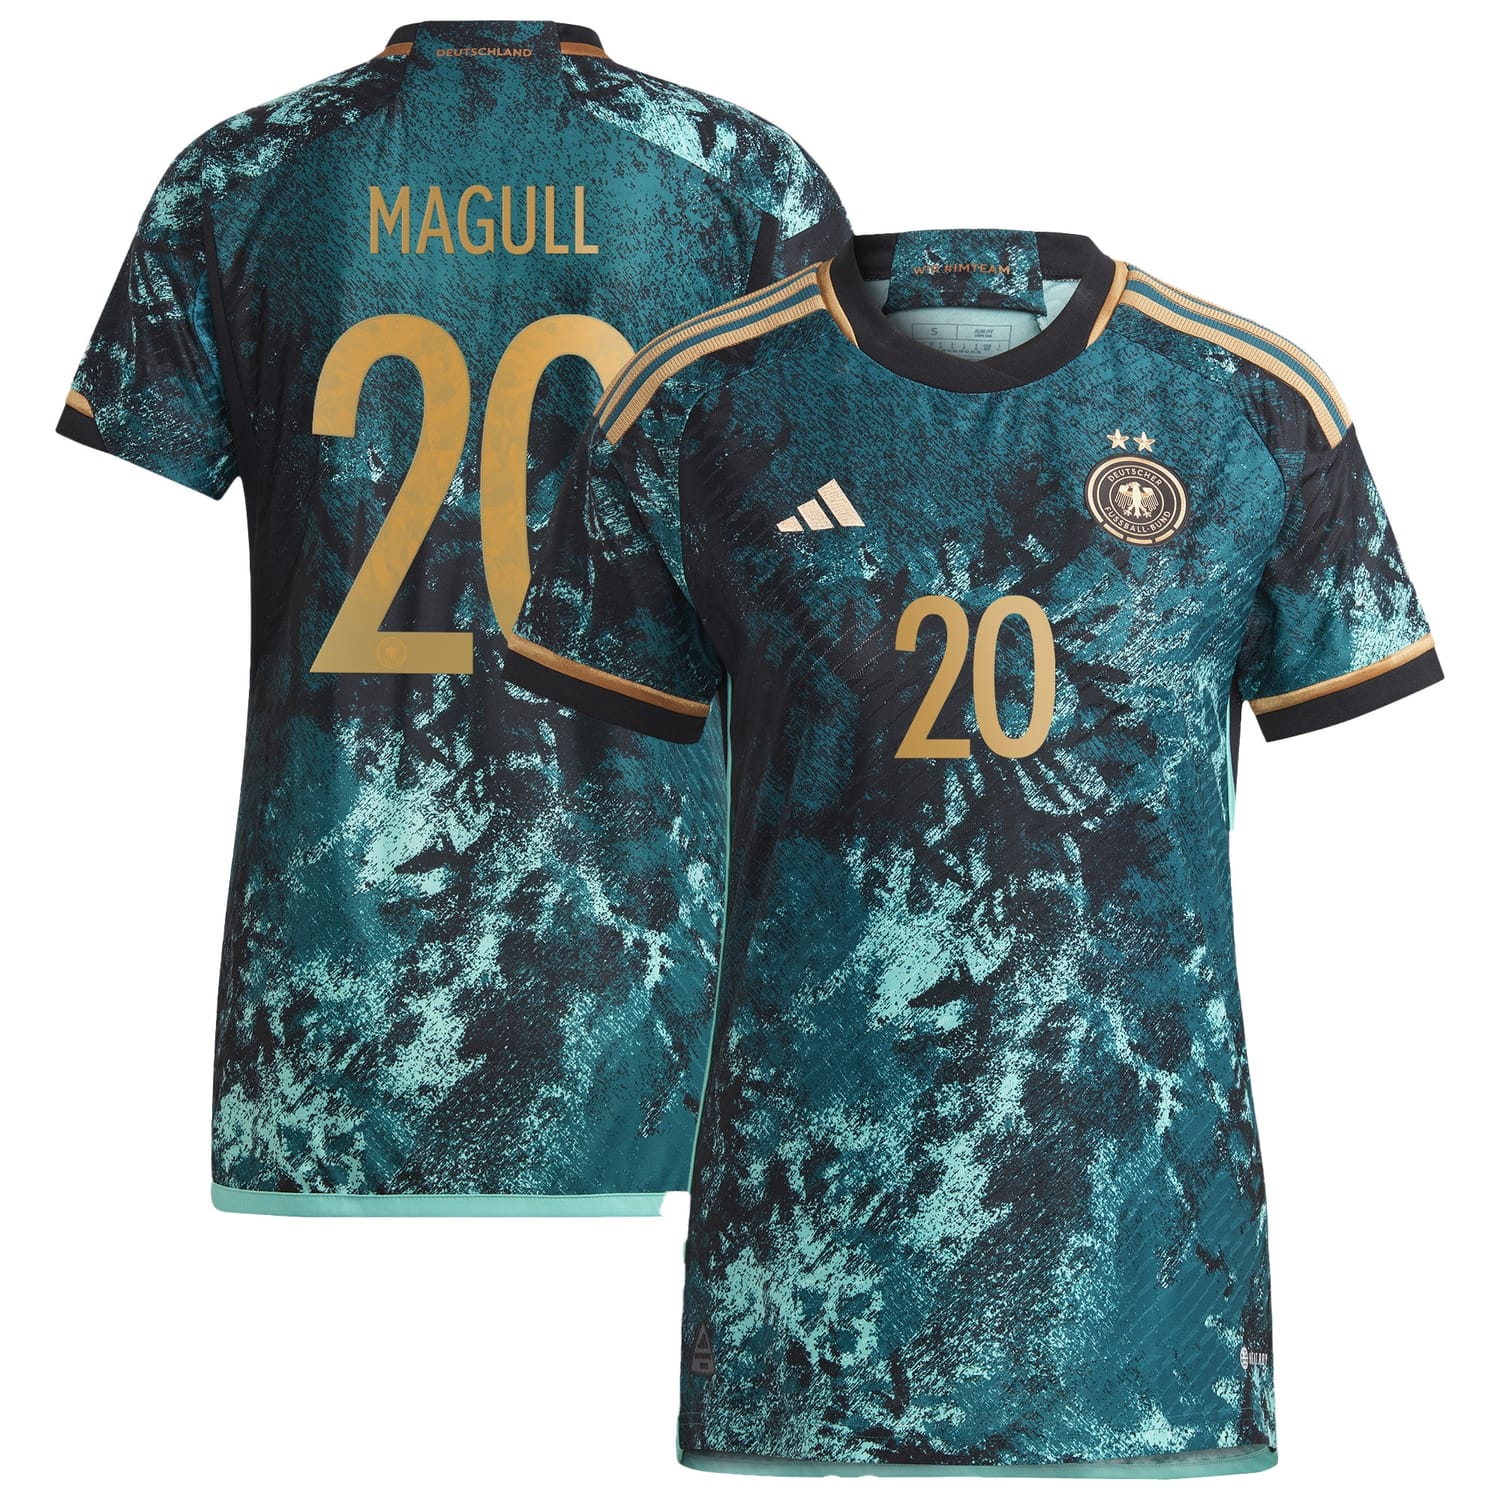 Germany National Team Away Authentic Jersey Shirt 2023 player Lina Magull 20 printing for Women